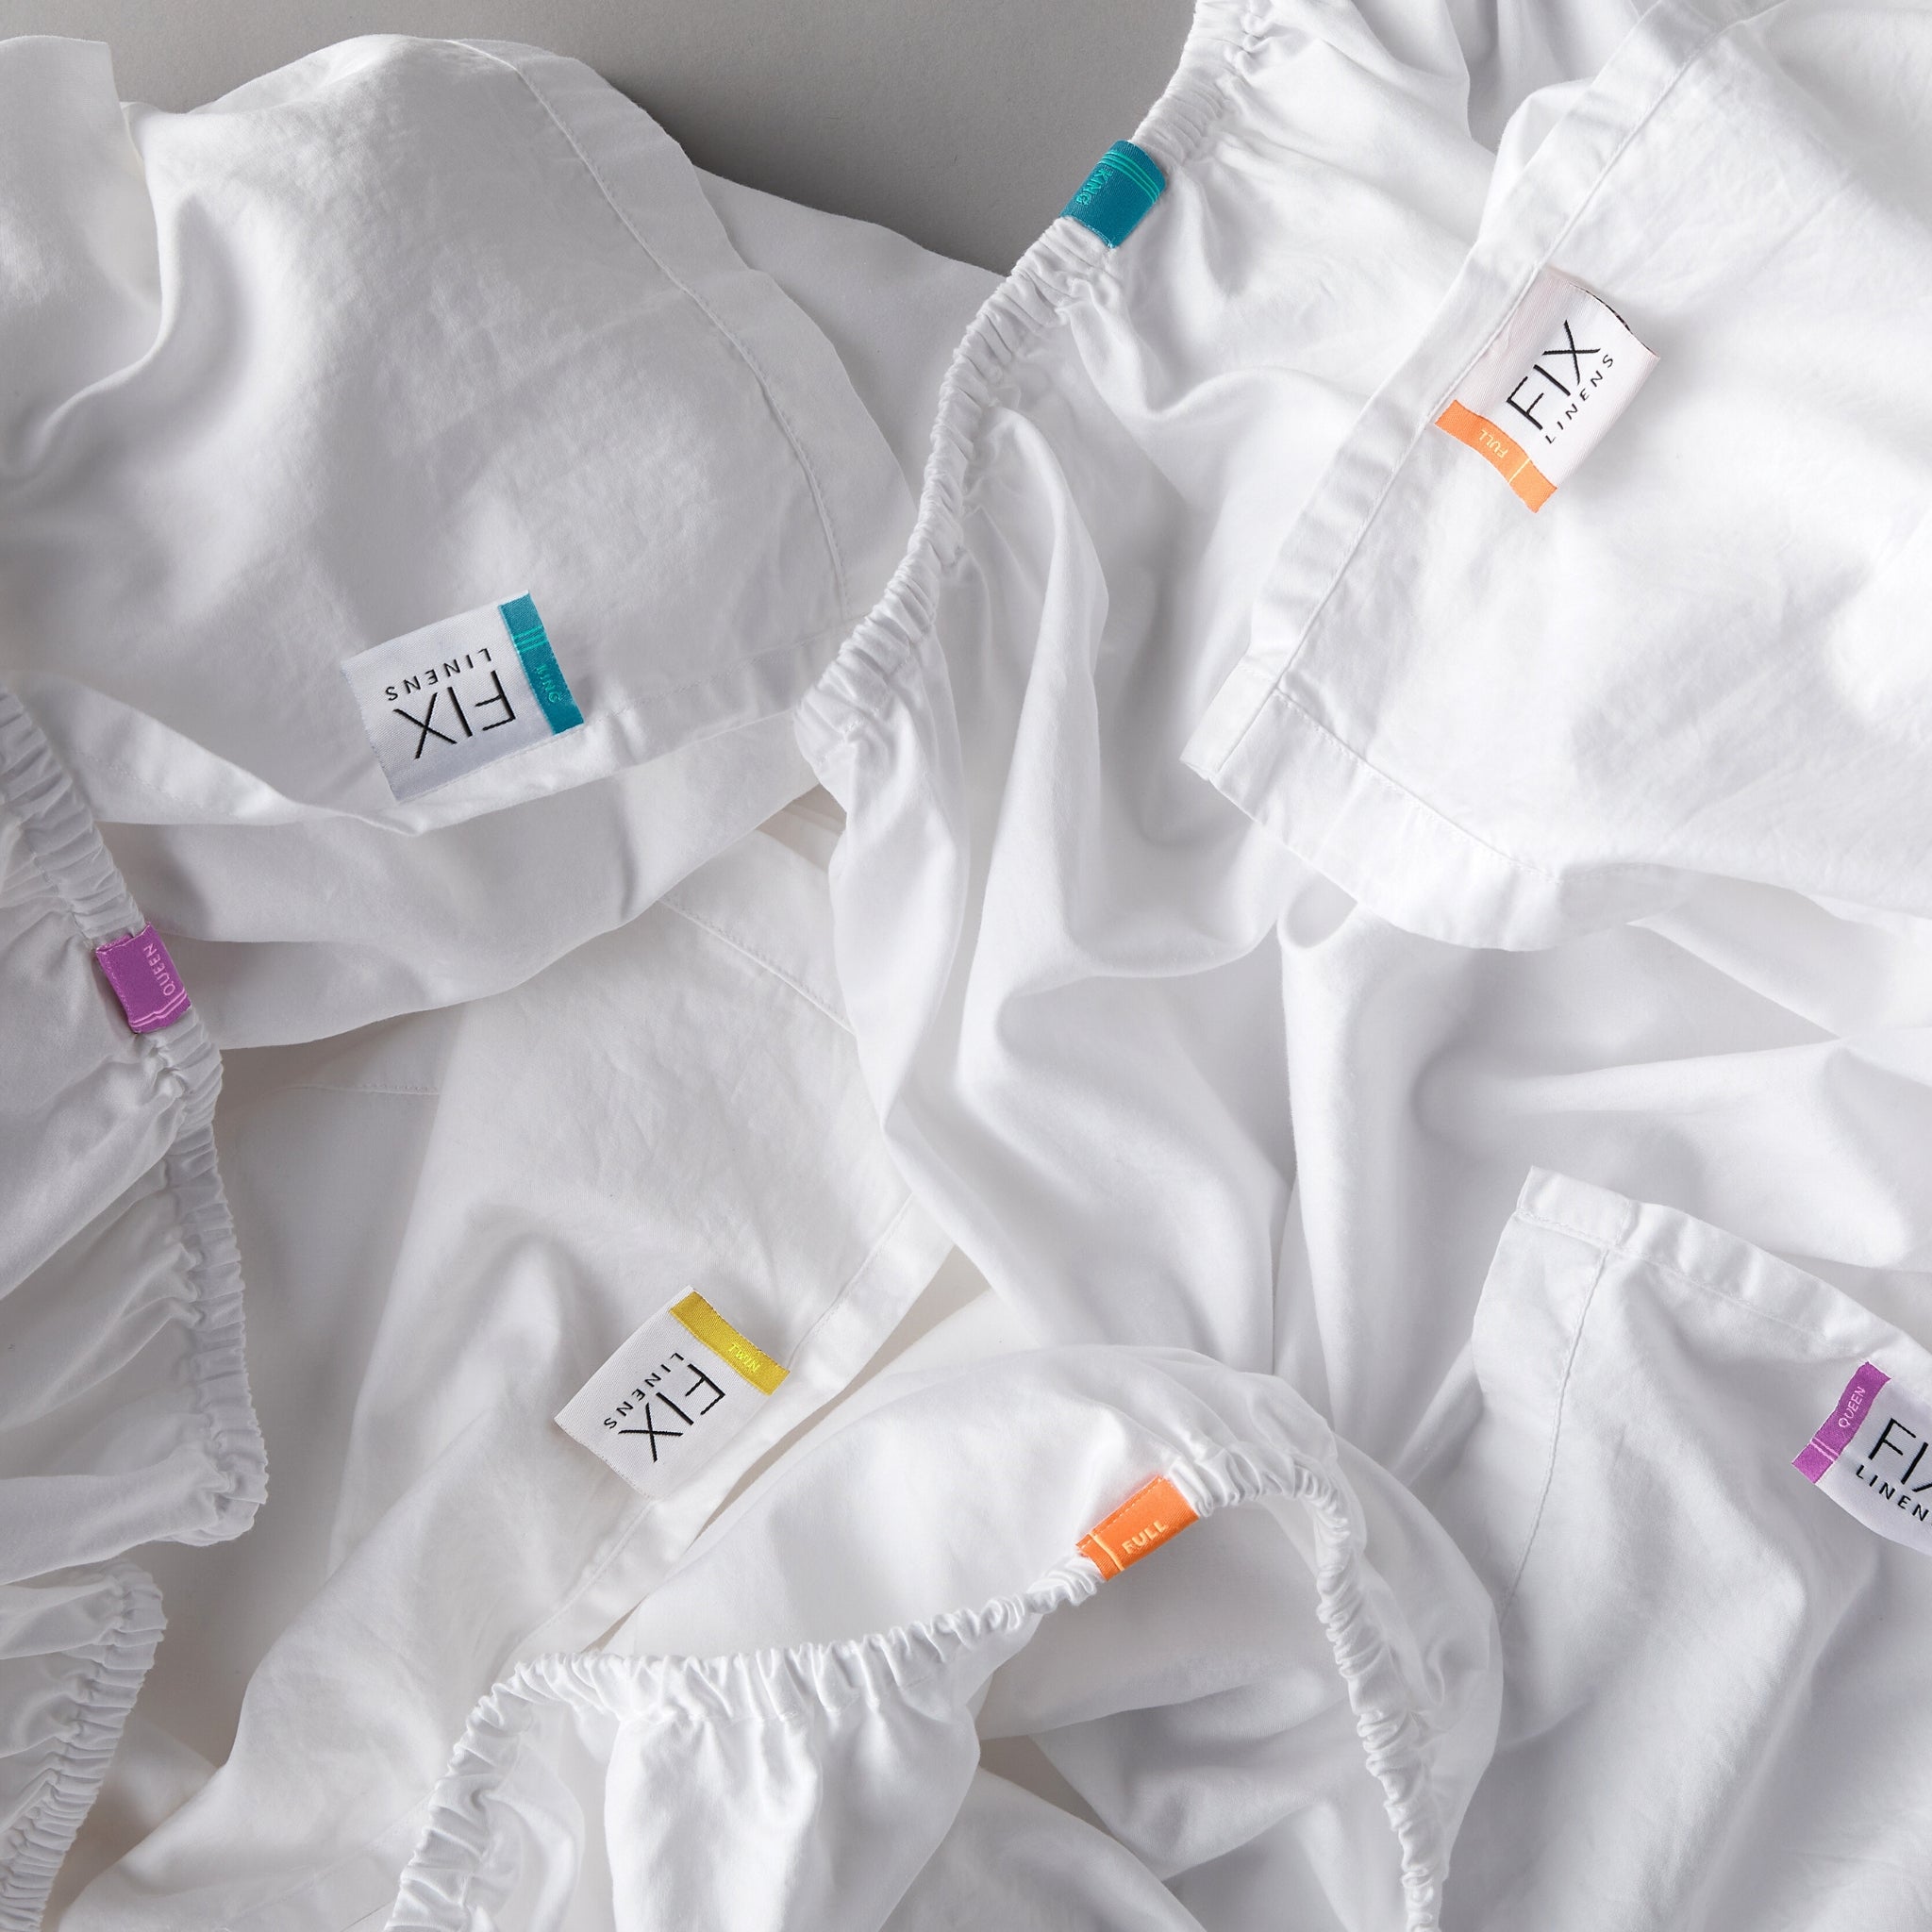 white sheets with colored tags indicating sheet sizes